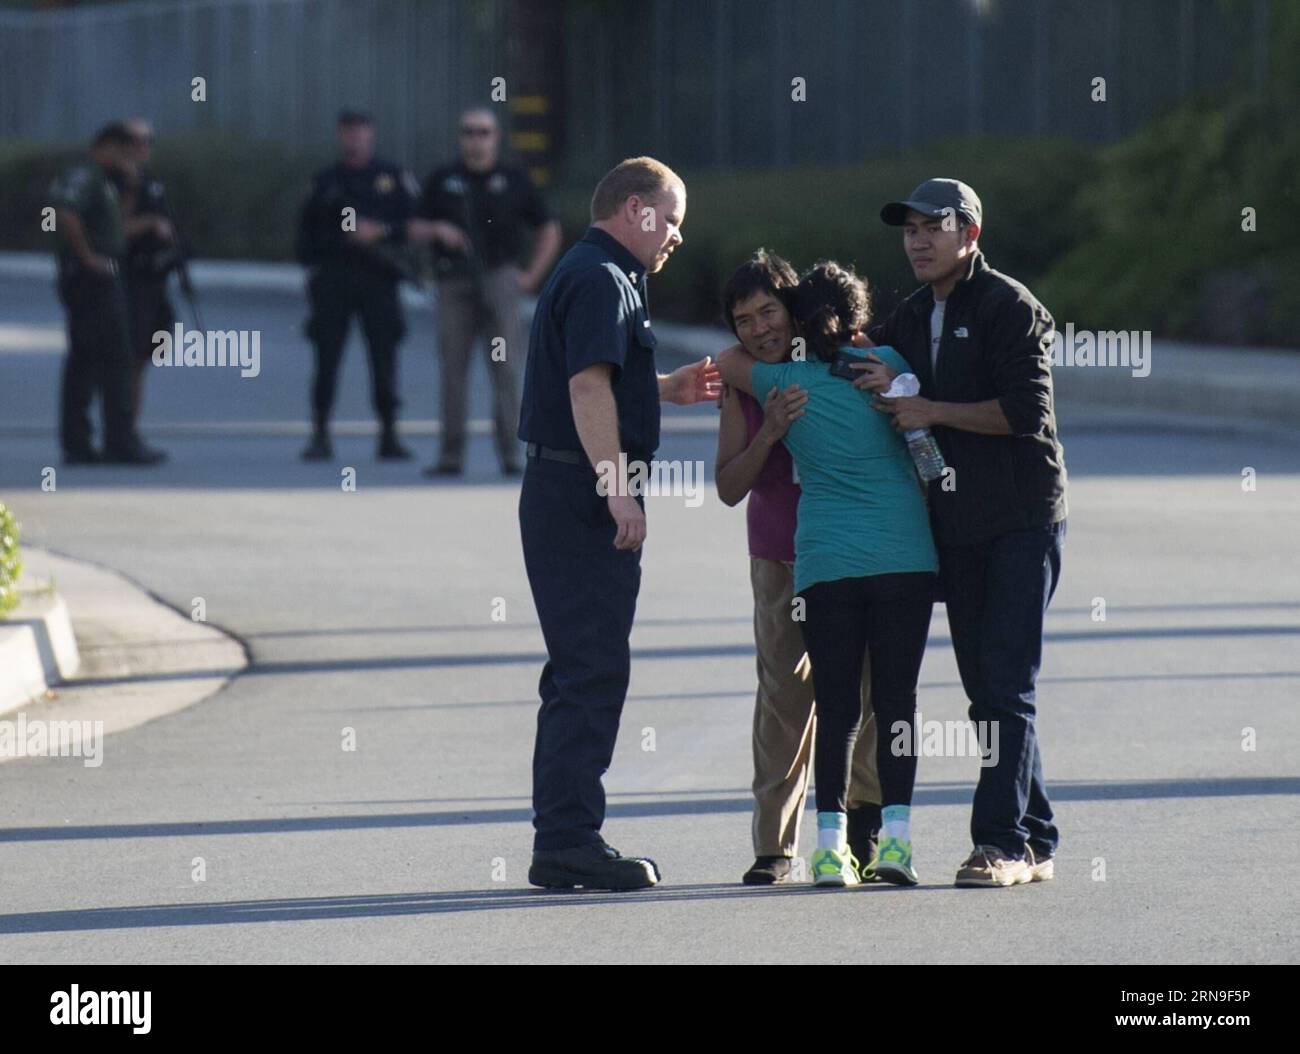 Tote bei Schießerei in San Benardino (151203) -- LOS ANGELES, Dec. 3, 2015 -- A survivor (2nd L) of the mass shooting at the Inland Regional Center meets her family after police questioning in San Bernardino City of Southern California, the United States, Dec. 2, 2015. One suspect was gunned down and one in custody Wednesday afternoon after a shooting killed at least 14 people and injured 14 others in San Bernardino, local media reported. ) (zw) U.S.-SAN BERNARDINO-SHOOTING YangxLei PUBLICATIONxNOTxINxCHN   Deaths at Shooting in San Benardino 151203 Los Angeles DEC 3 2015 a Survivor 2nd l of T Stock Photo